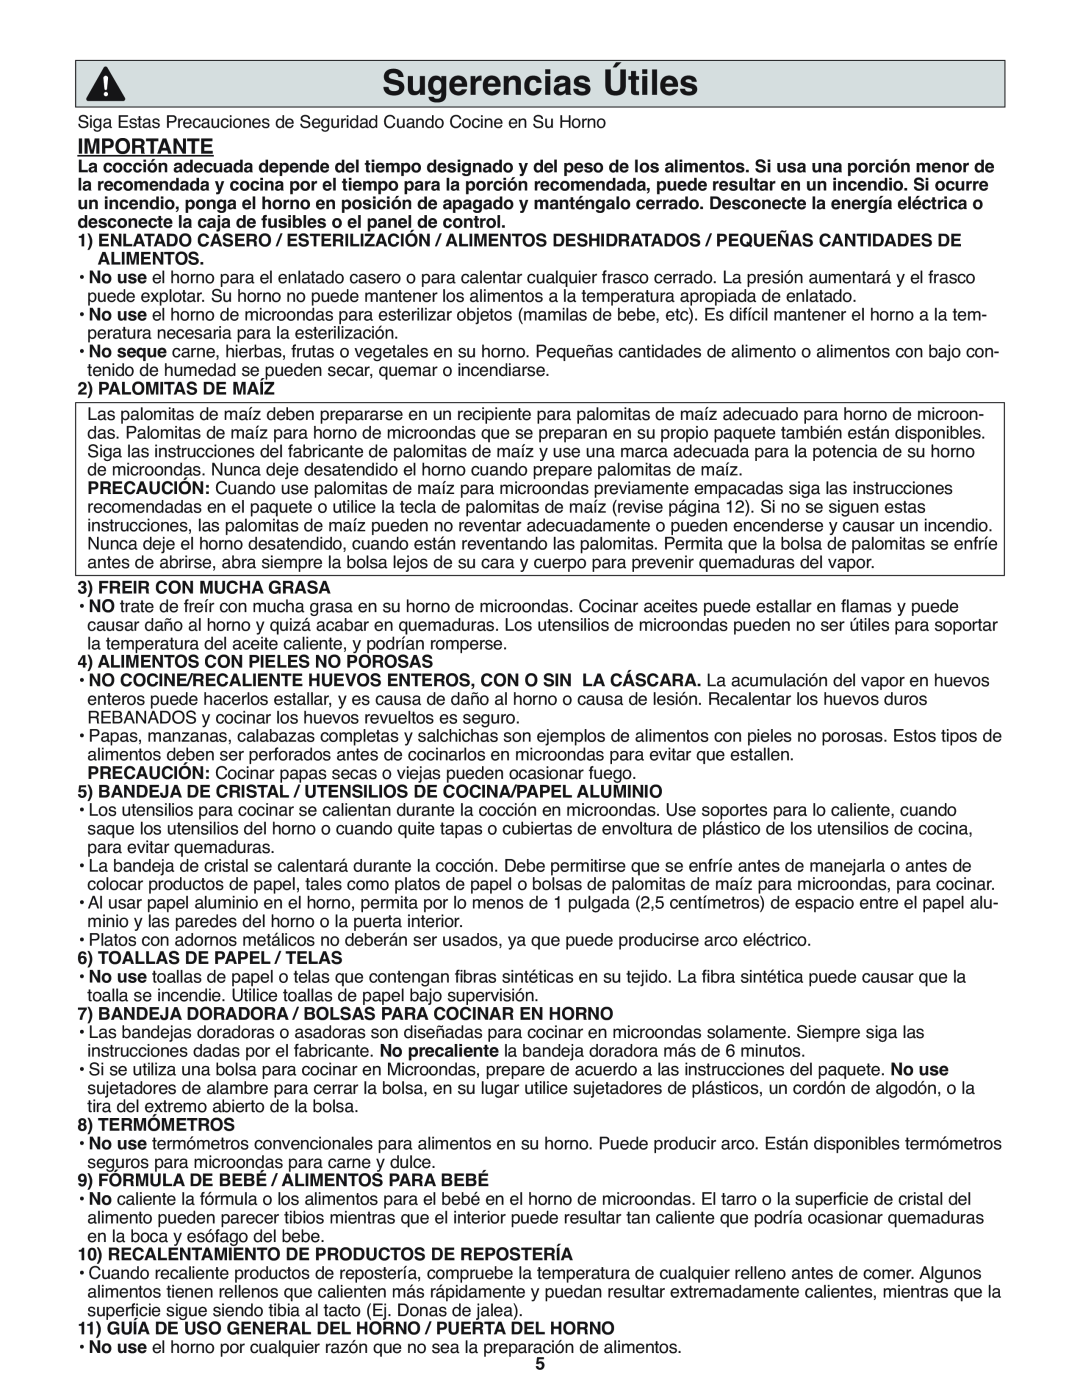 Panasonic NN-H275 operating instructions Sugerencias Útiles, Importante 